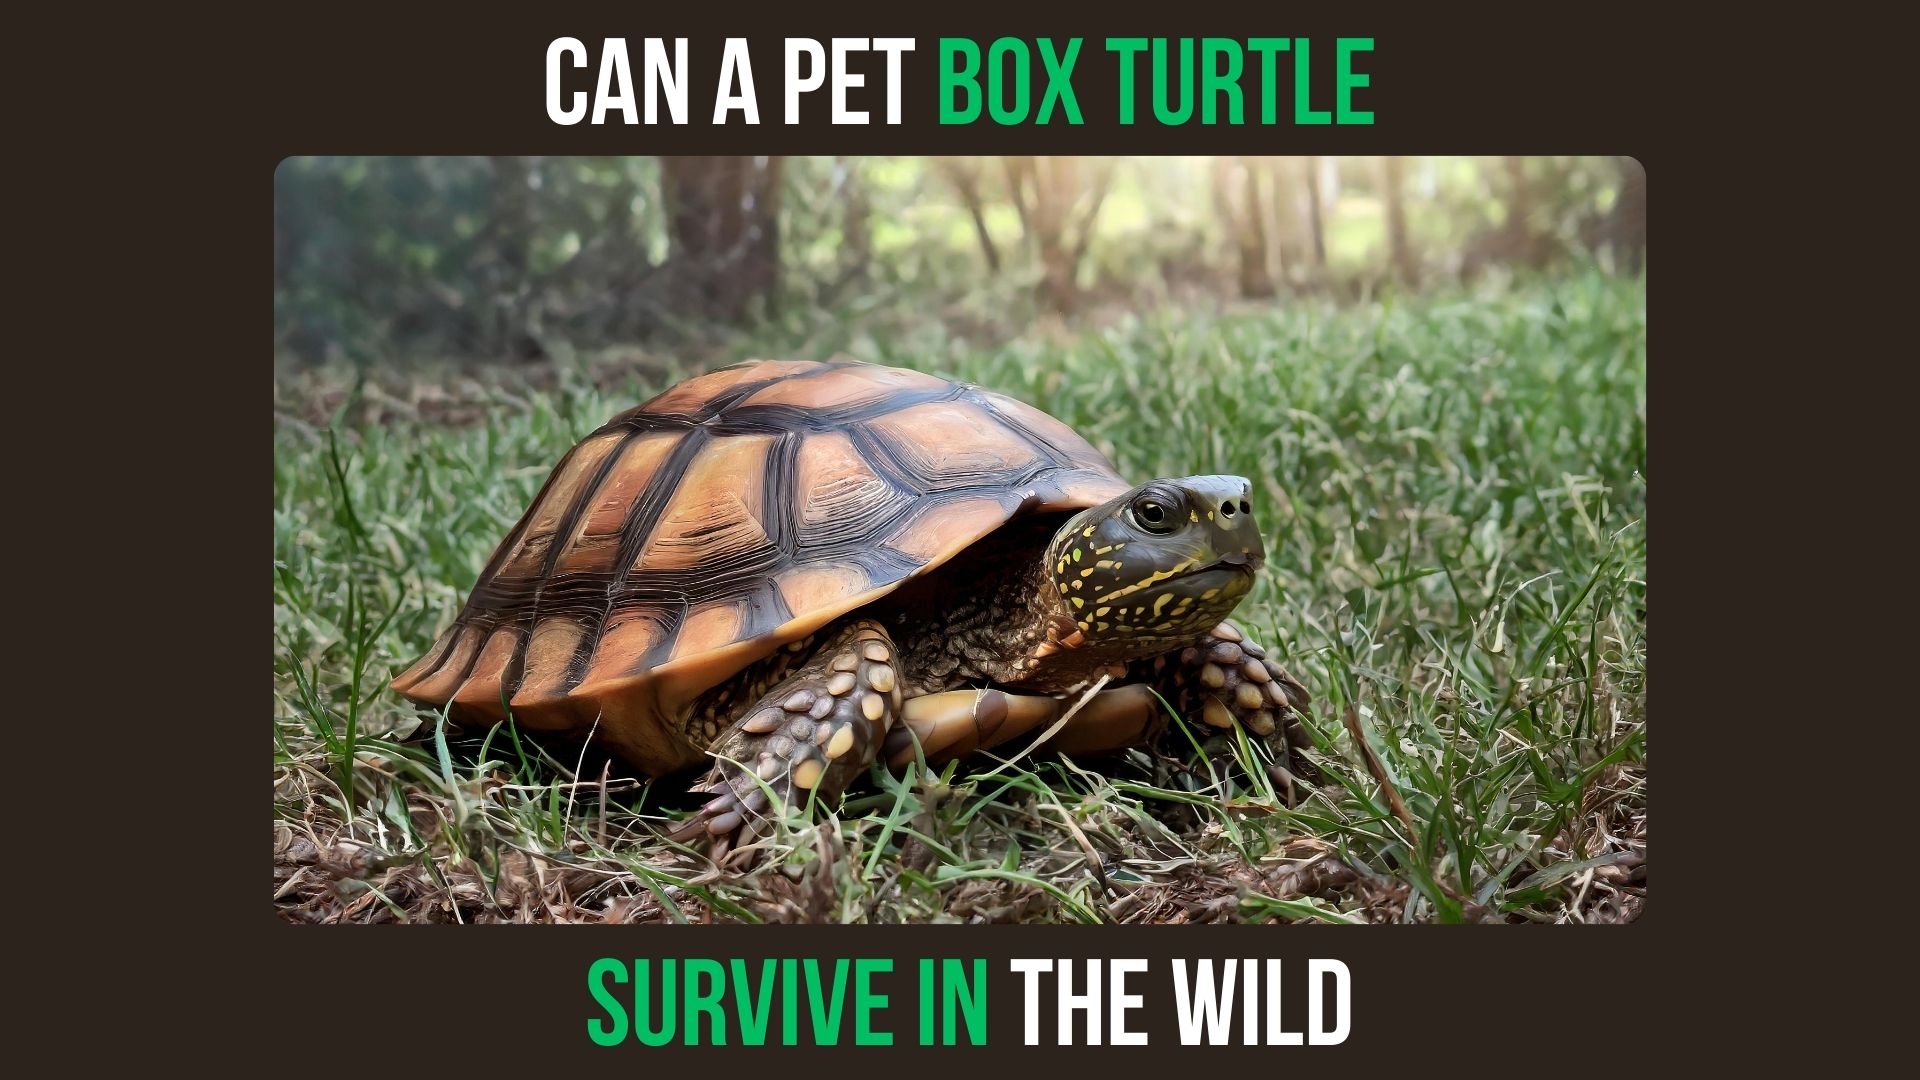 Can a Pet Box Turtle Survive in the Wild